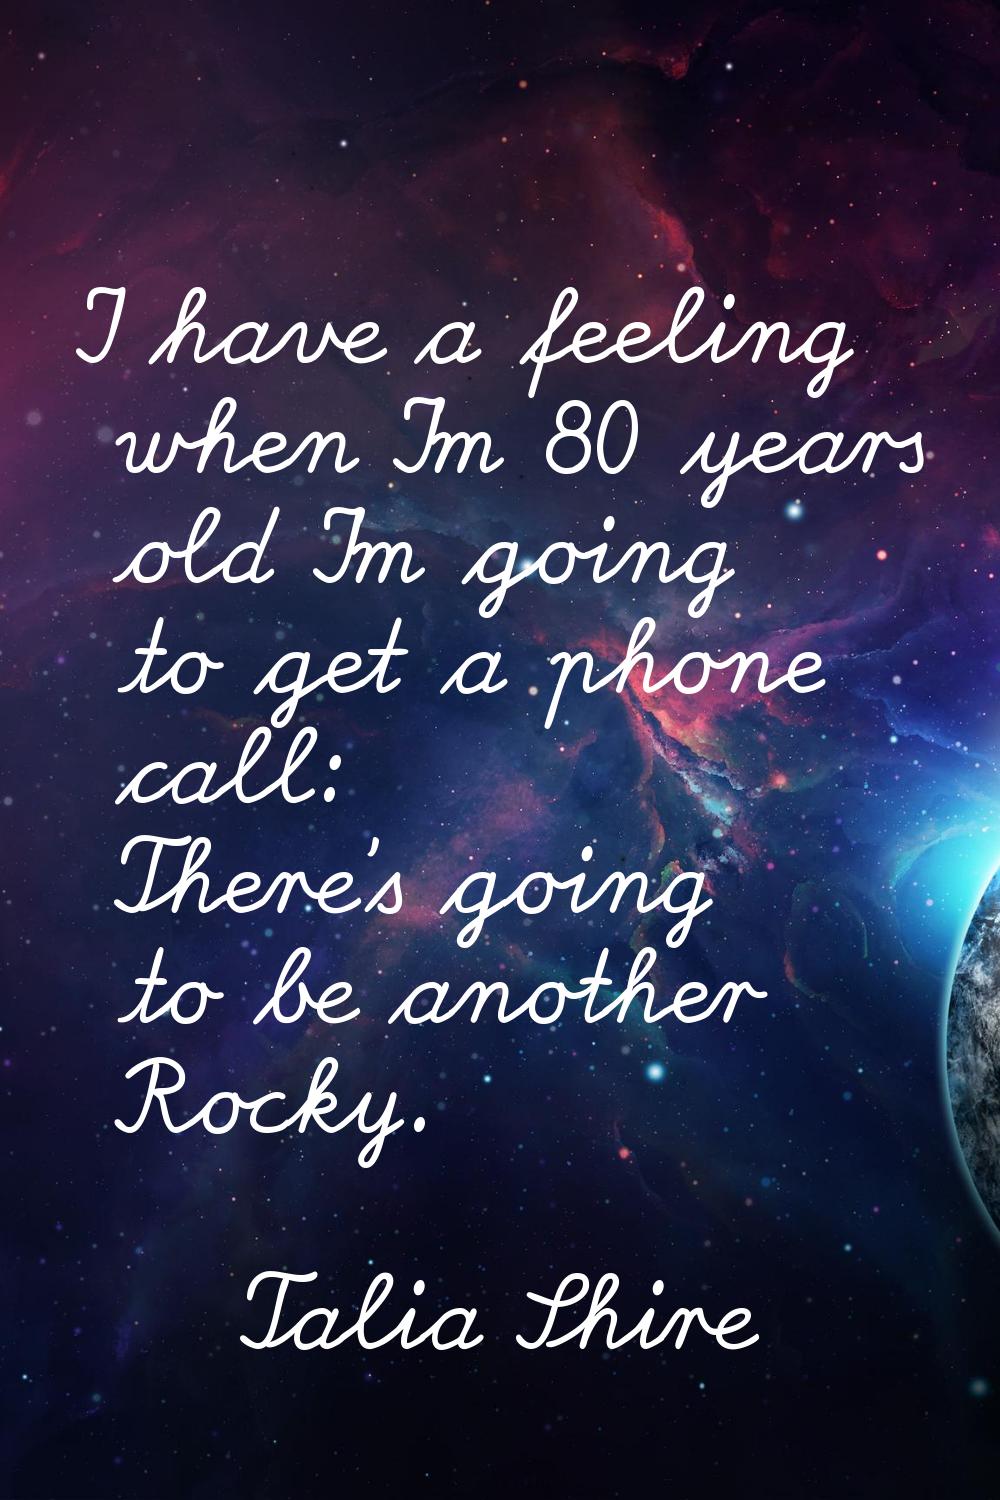 I have a feeling when I'm 80 years old I'm going to get a phone call: There's going to be another R